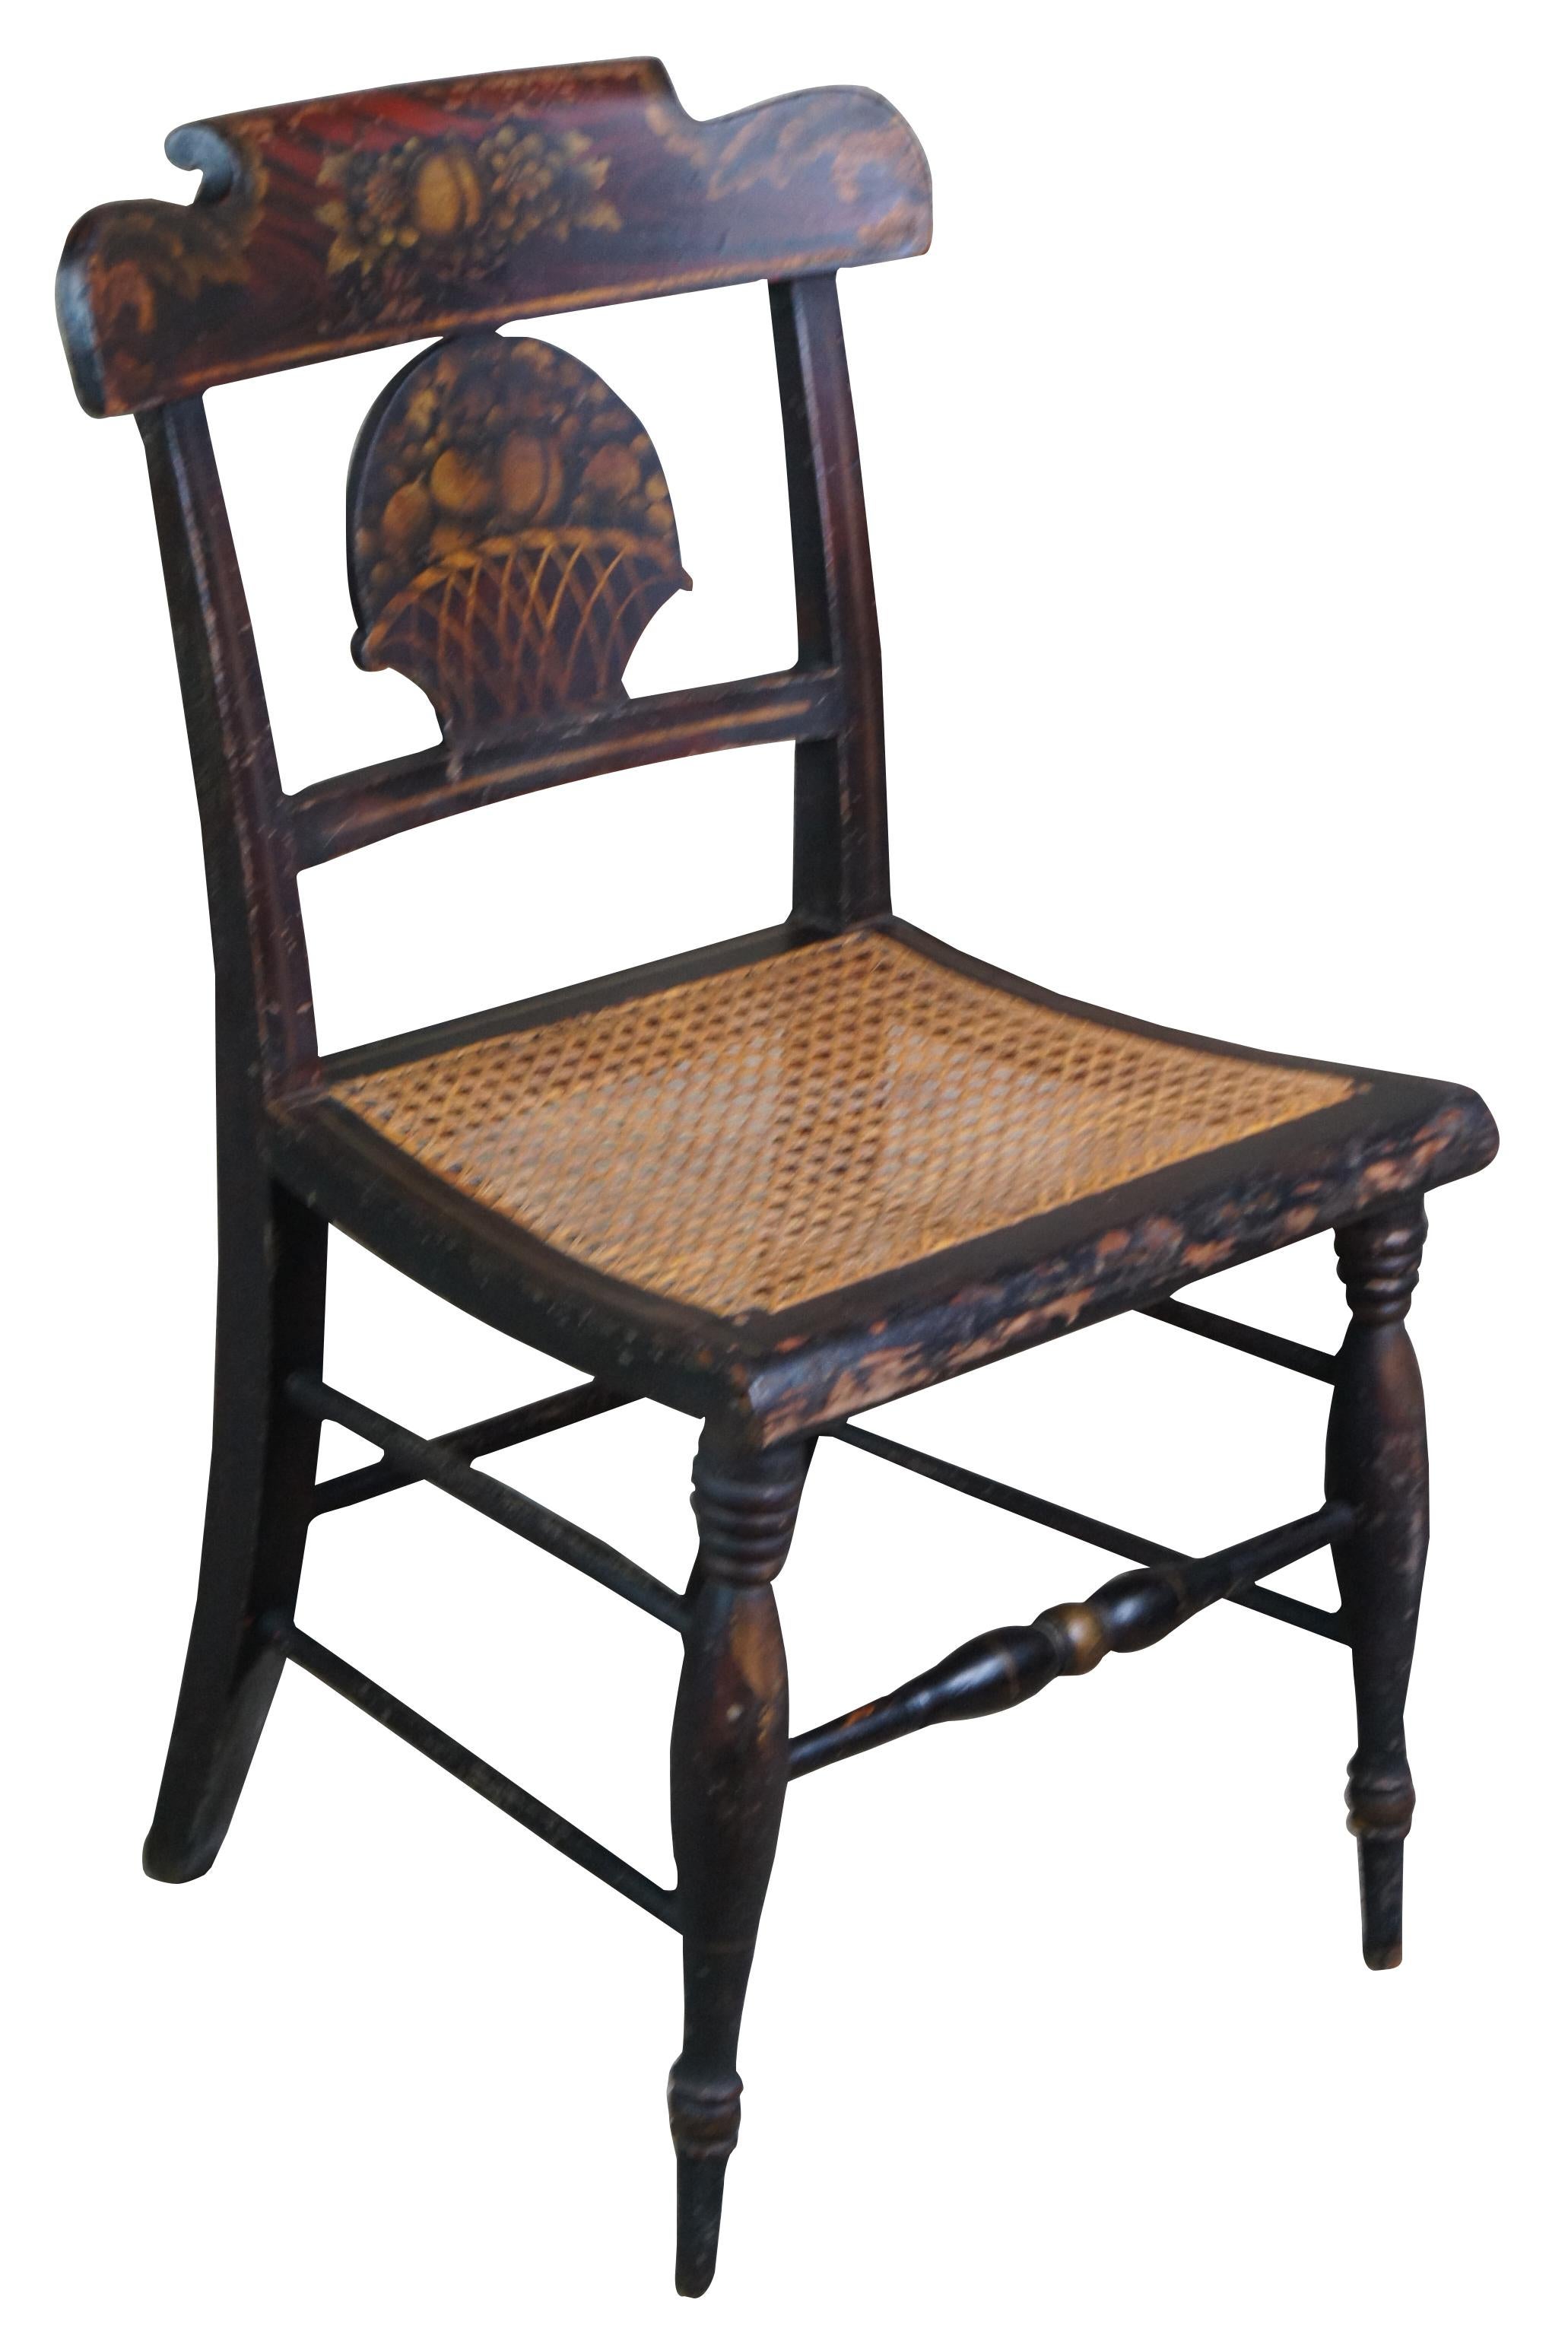 Mid-19th century stenciled Hitchcock dining chair featuring a fruit basket shaped back splat and cane seat. Measure: 33